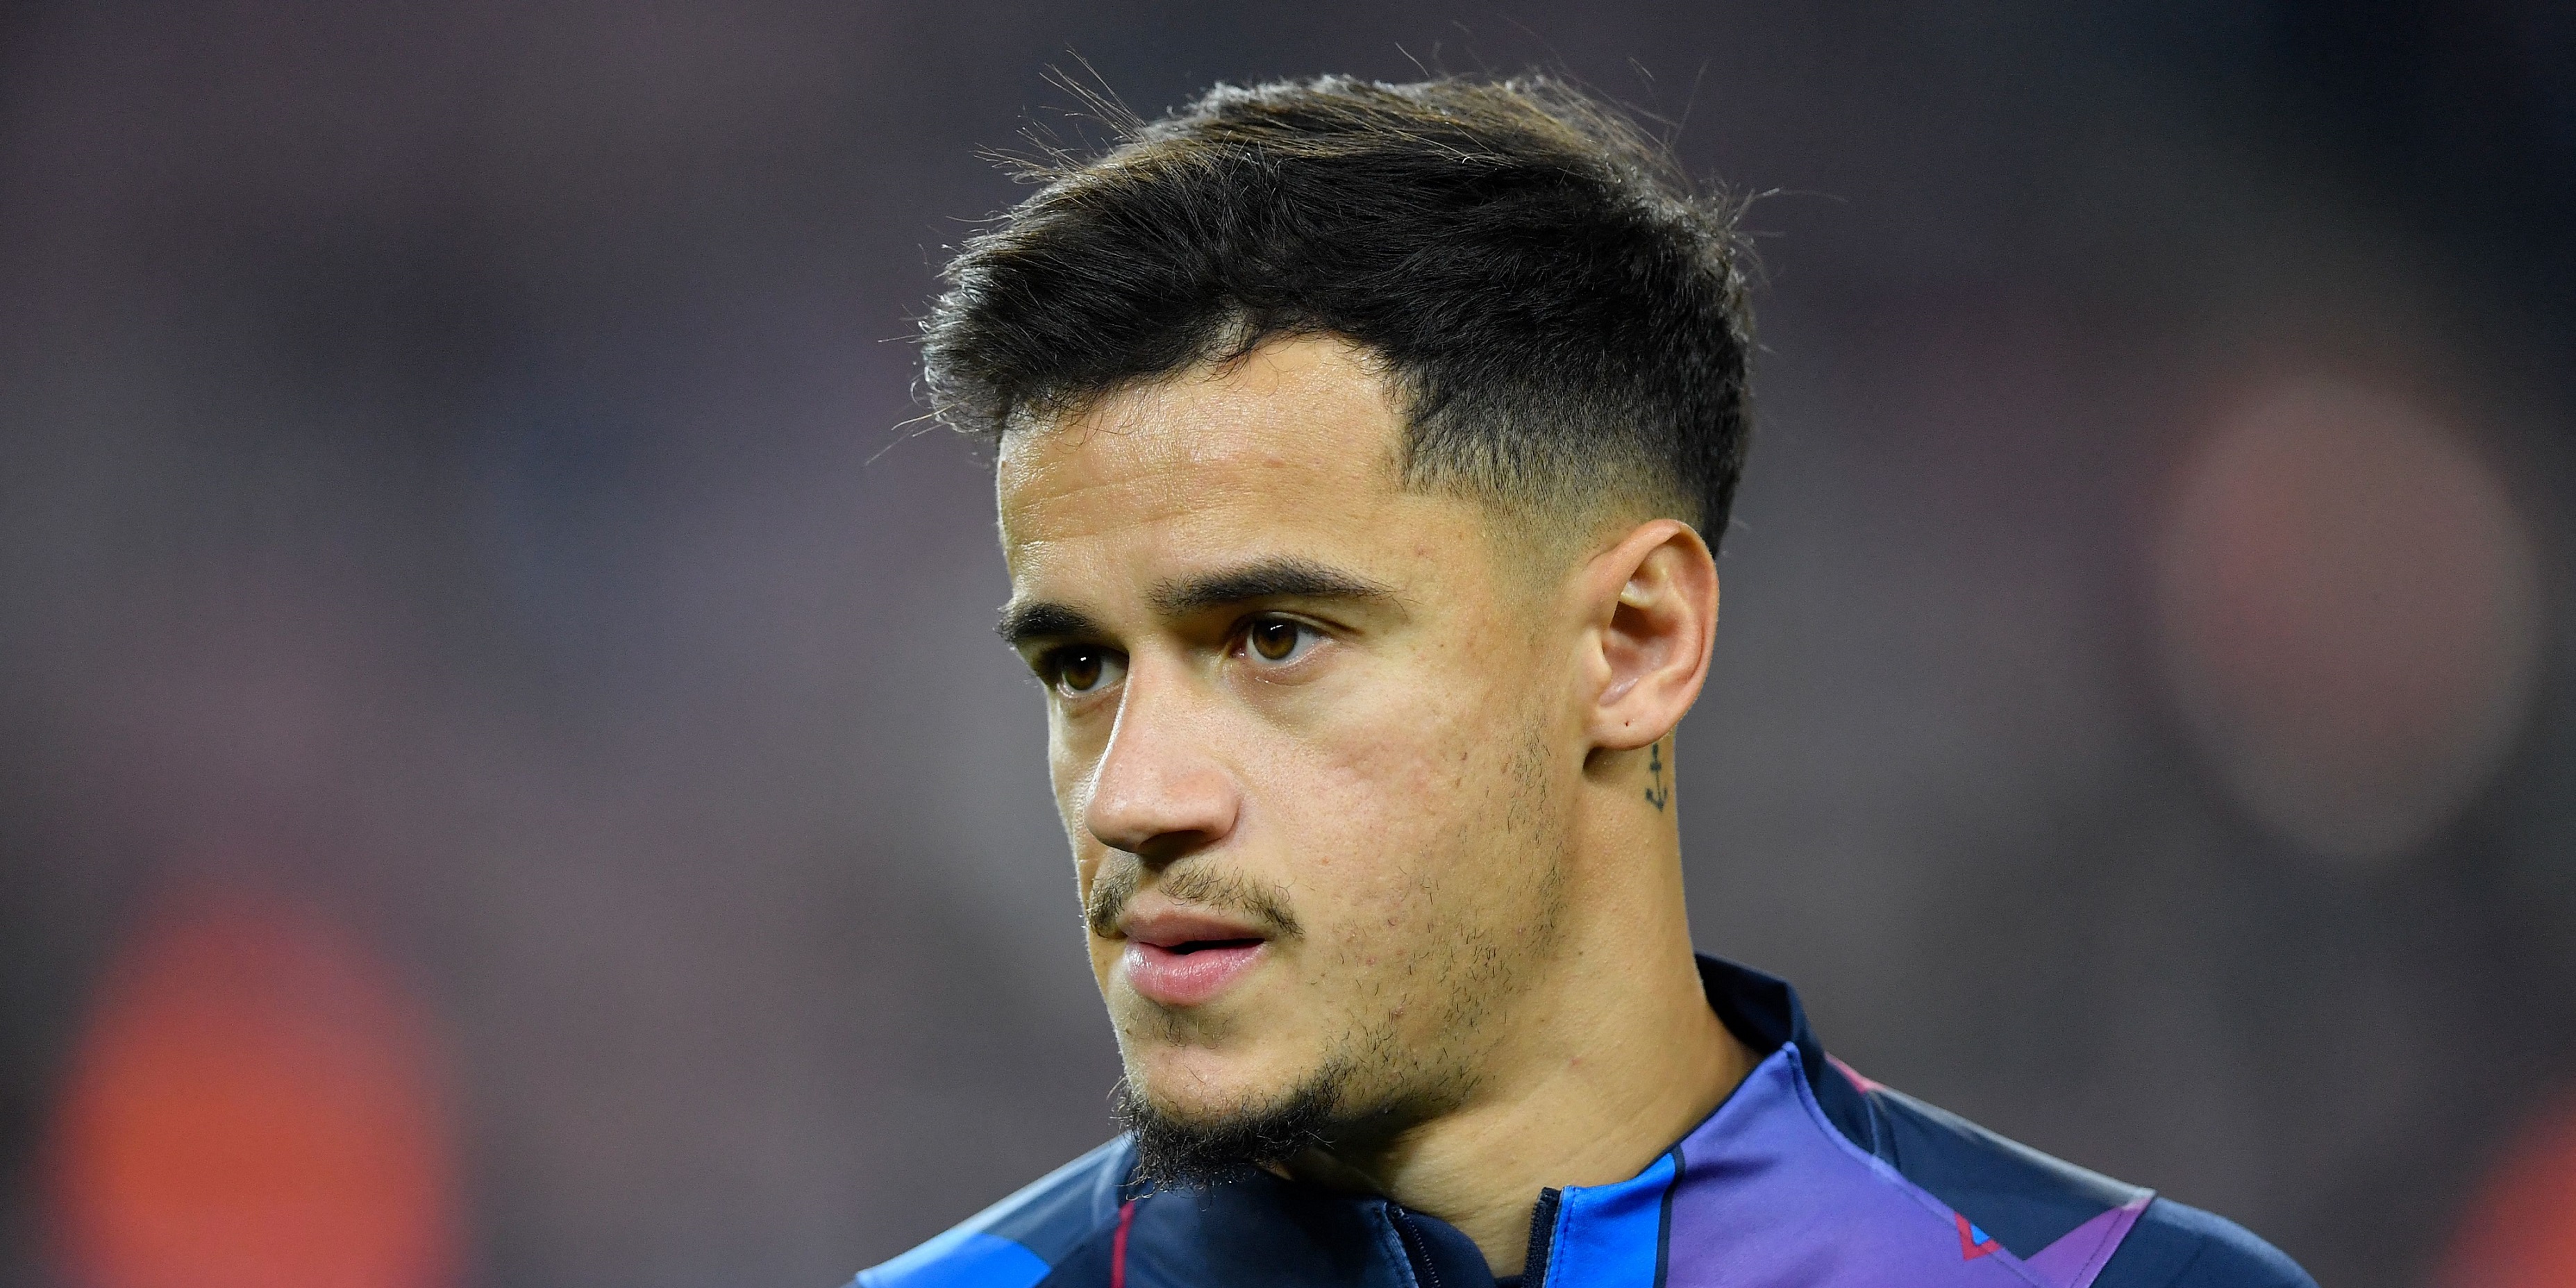 Aston Villa confirm Athletic’s Coutinho report – Ex-Red officially joins Gerrard’s men on loan